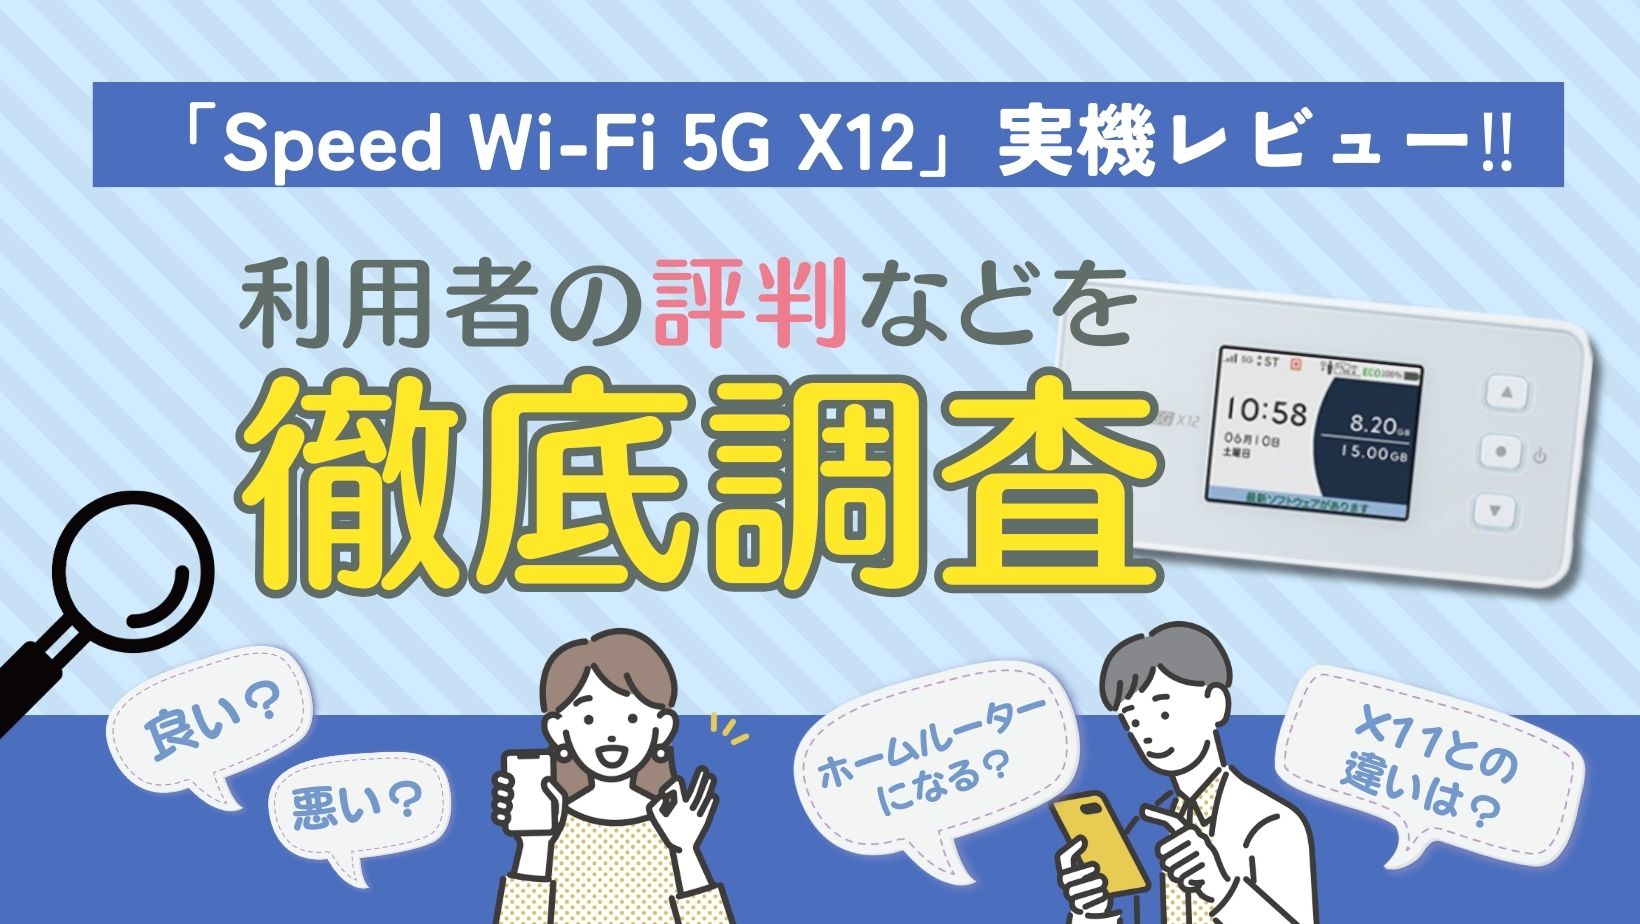 Speed Wi-Fi 5G X12の実機レビュー！X11との違いは？利用者の評判